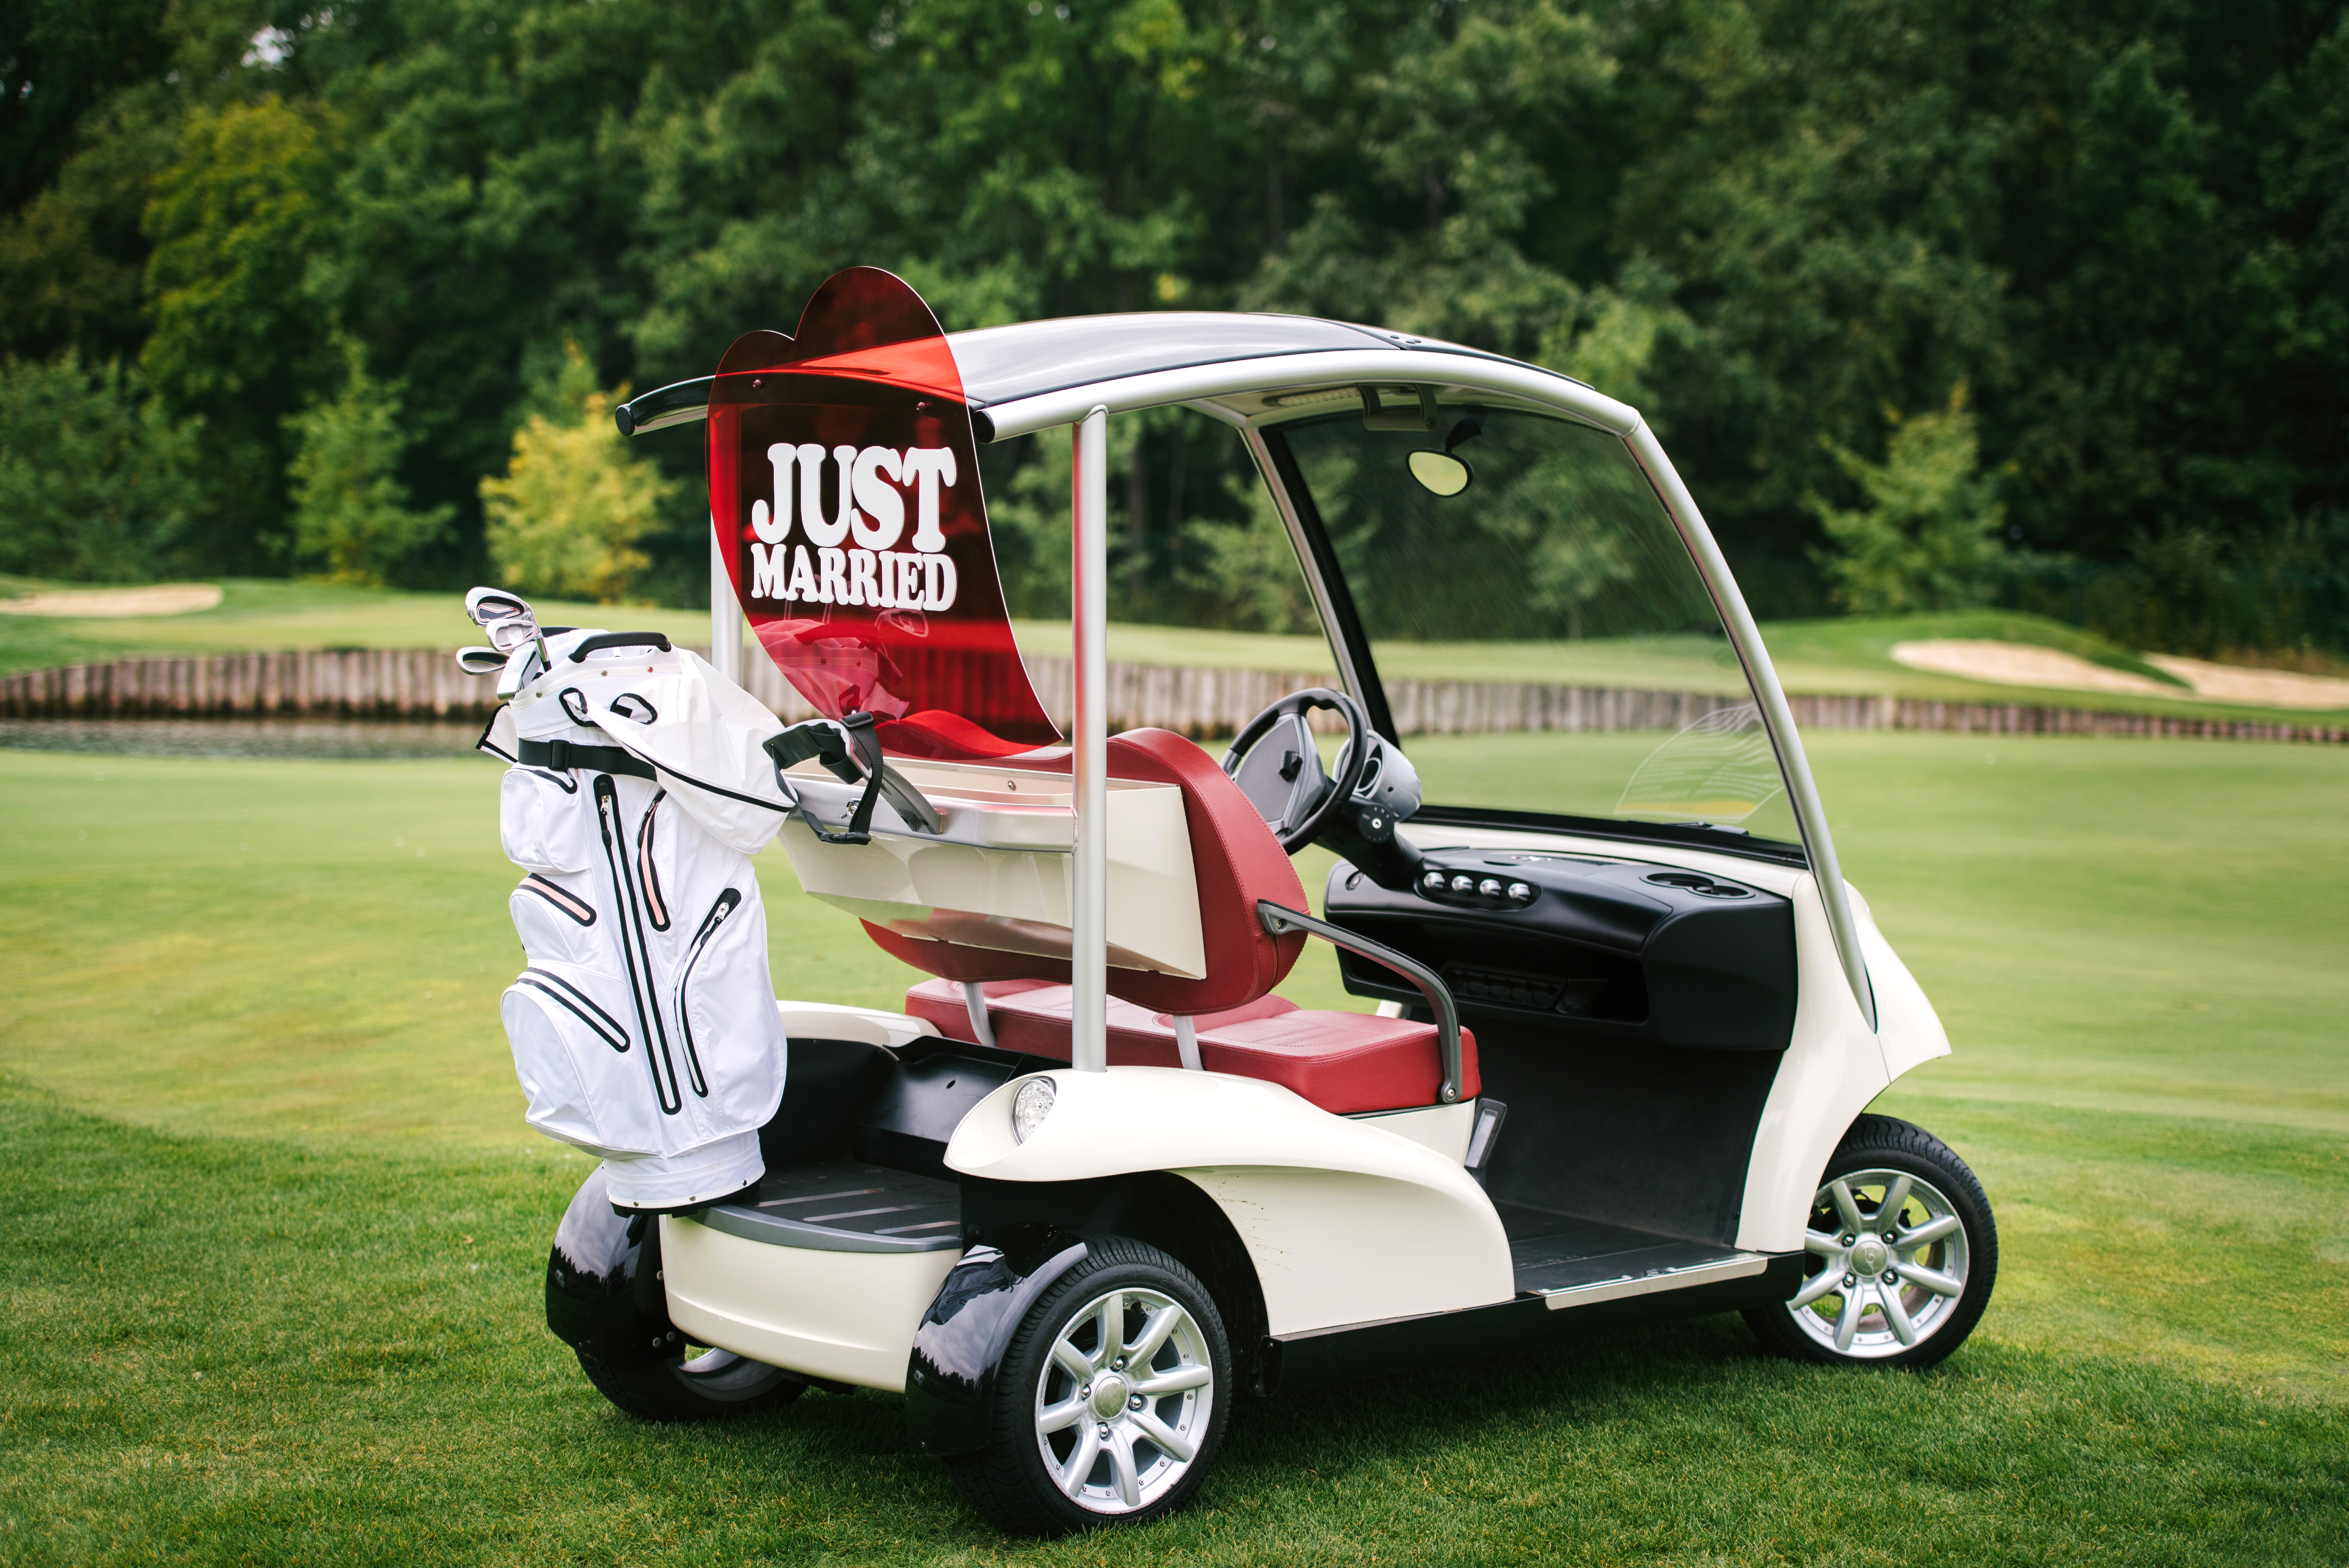 A golf cart with a 'Just Married' sign | Source: Shutterstock